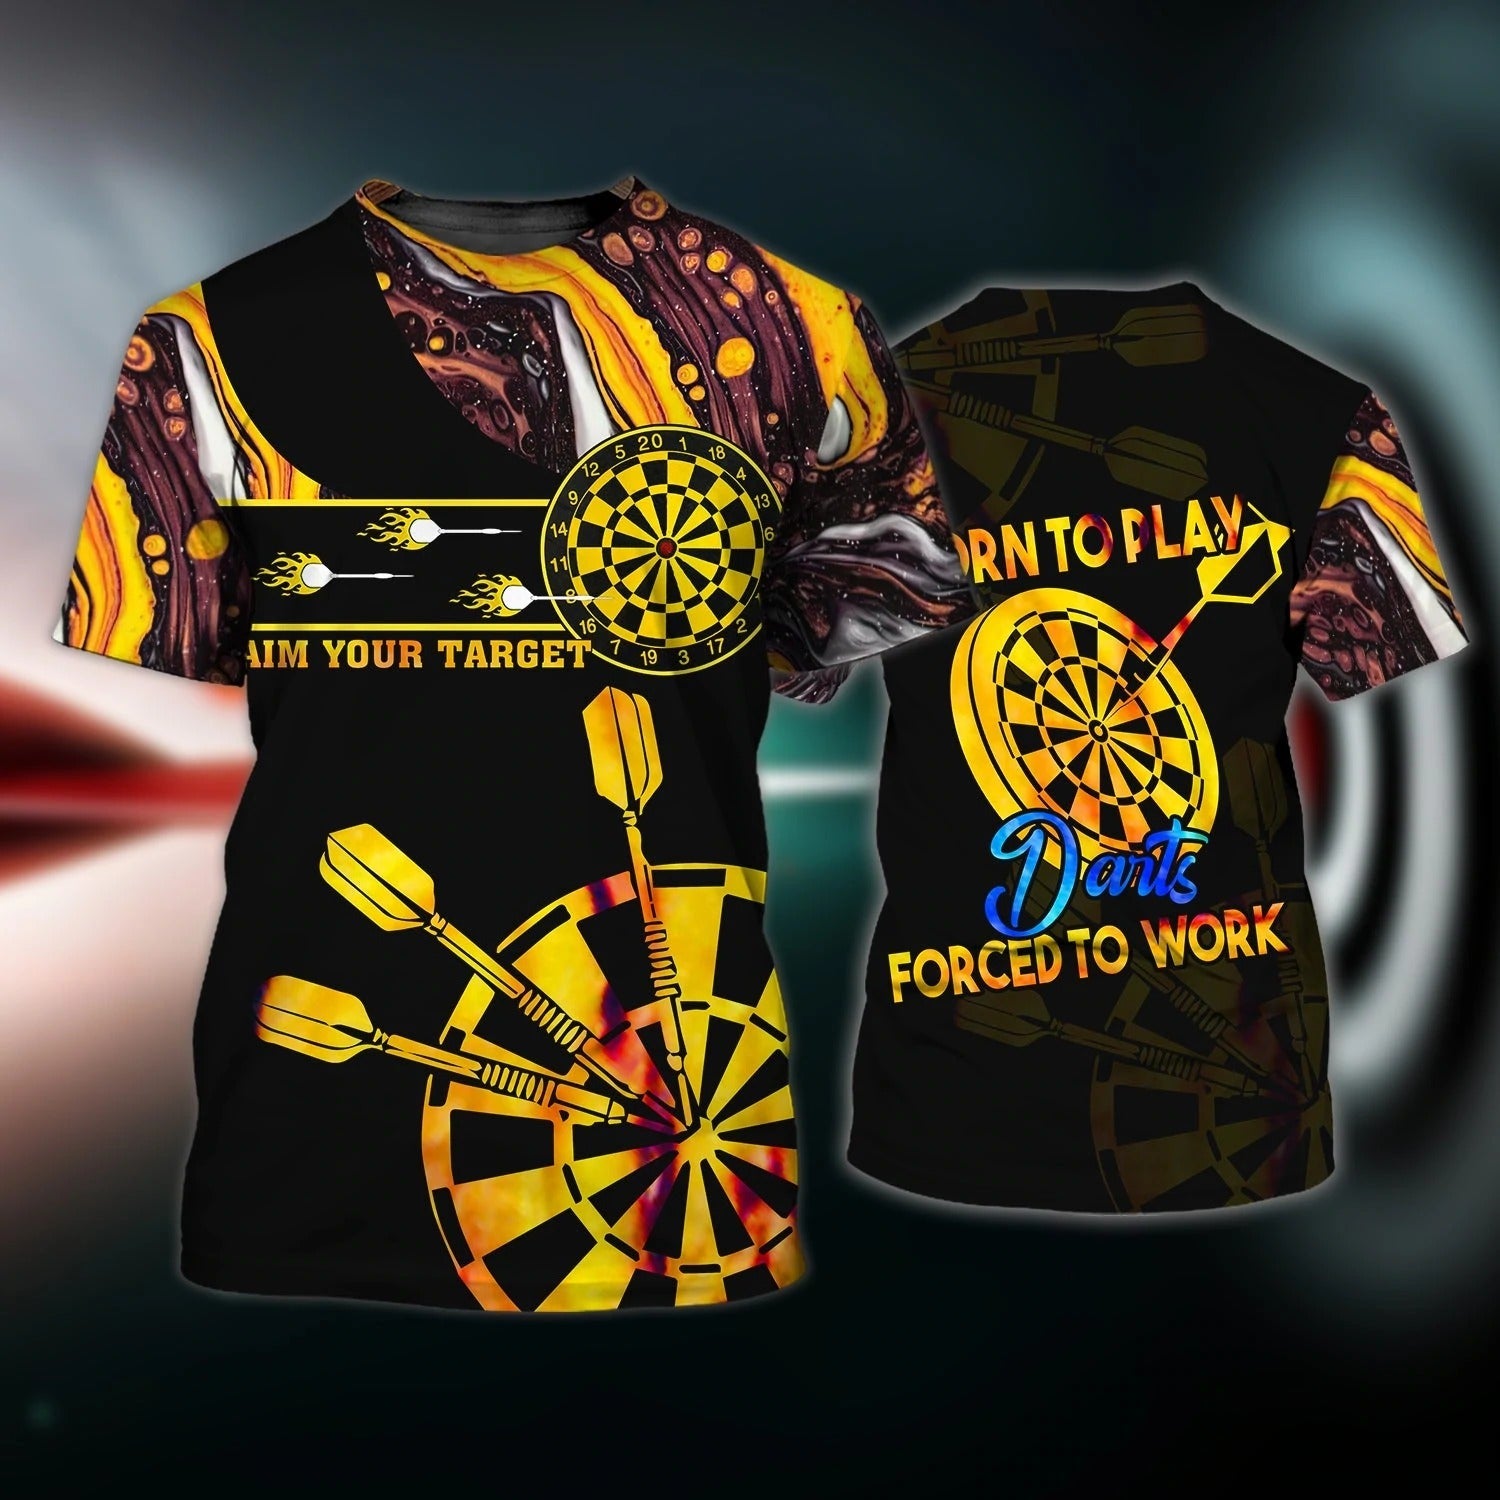 Personalized Dart Shirt Full Printing For Darts Player/ Gift For Dart Lover/ Dart Player Gifts